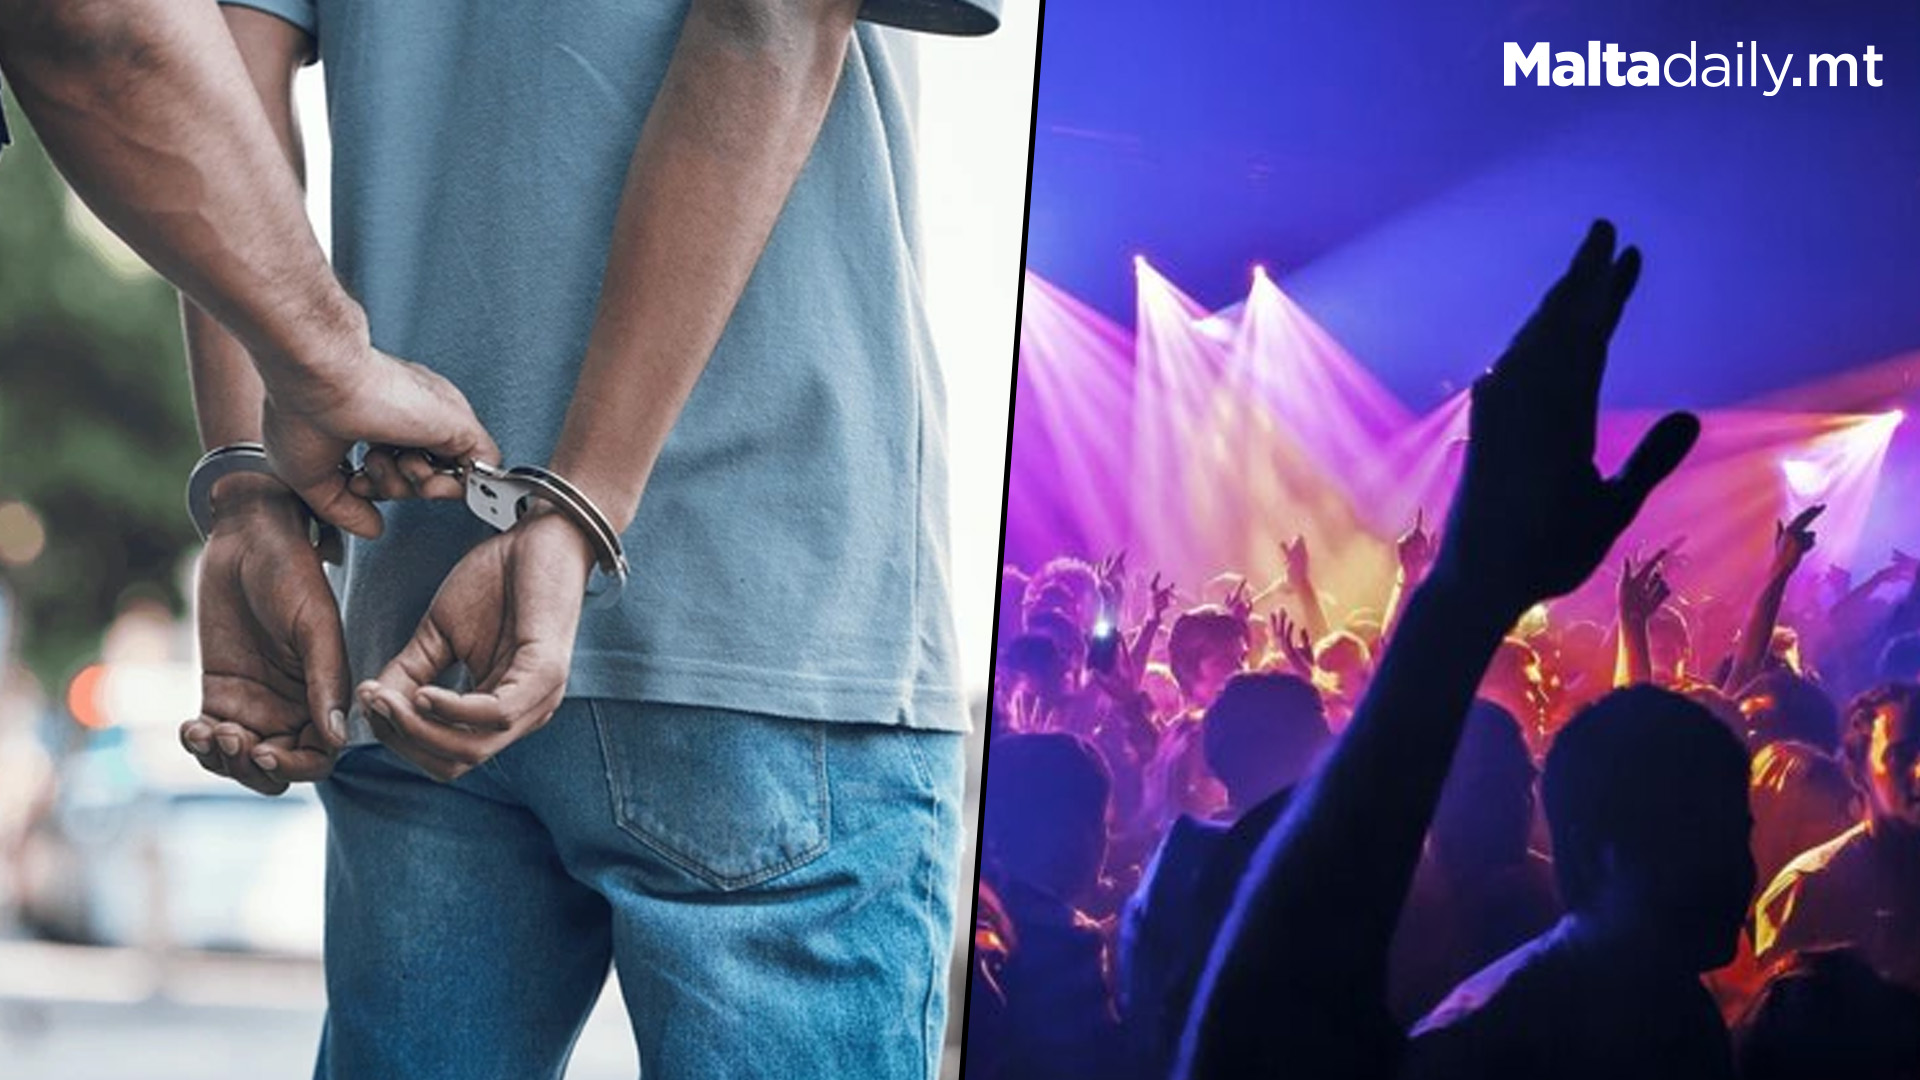 4 Youth Arrested After Stealing Jewellery Off Party-Goers' Necks